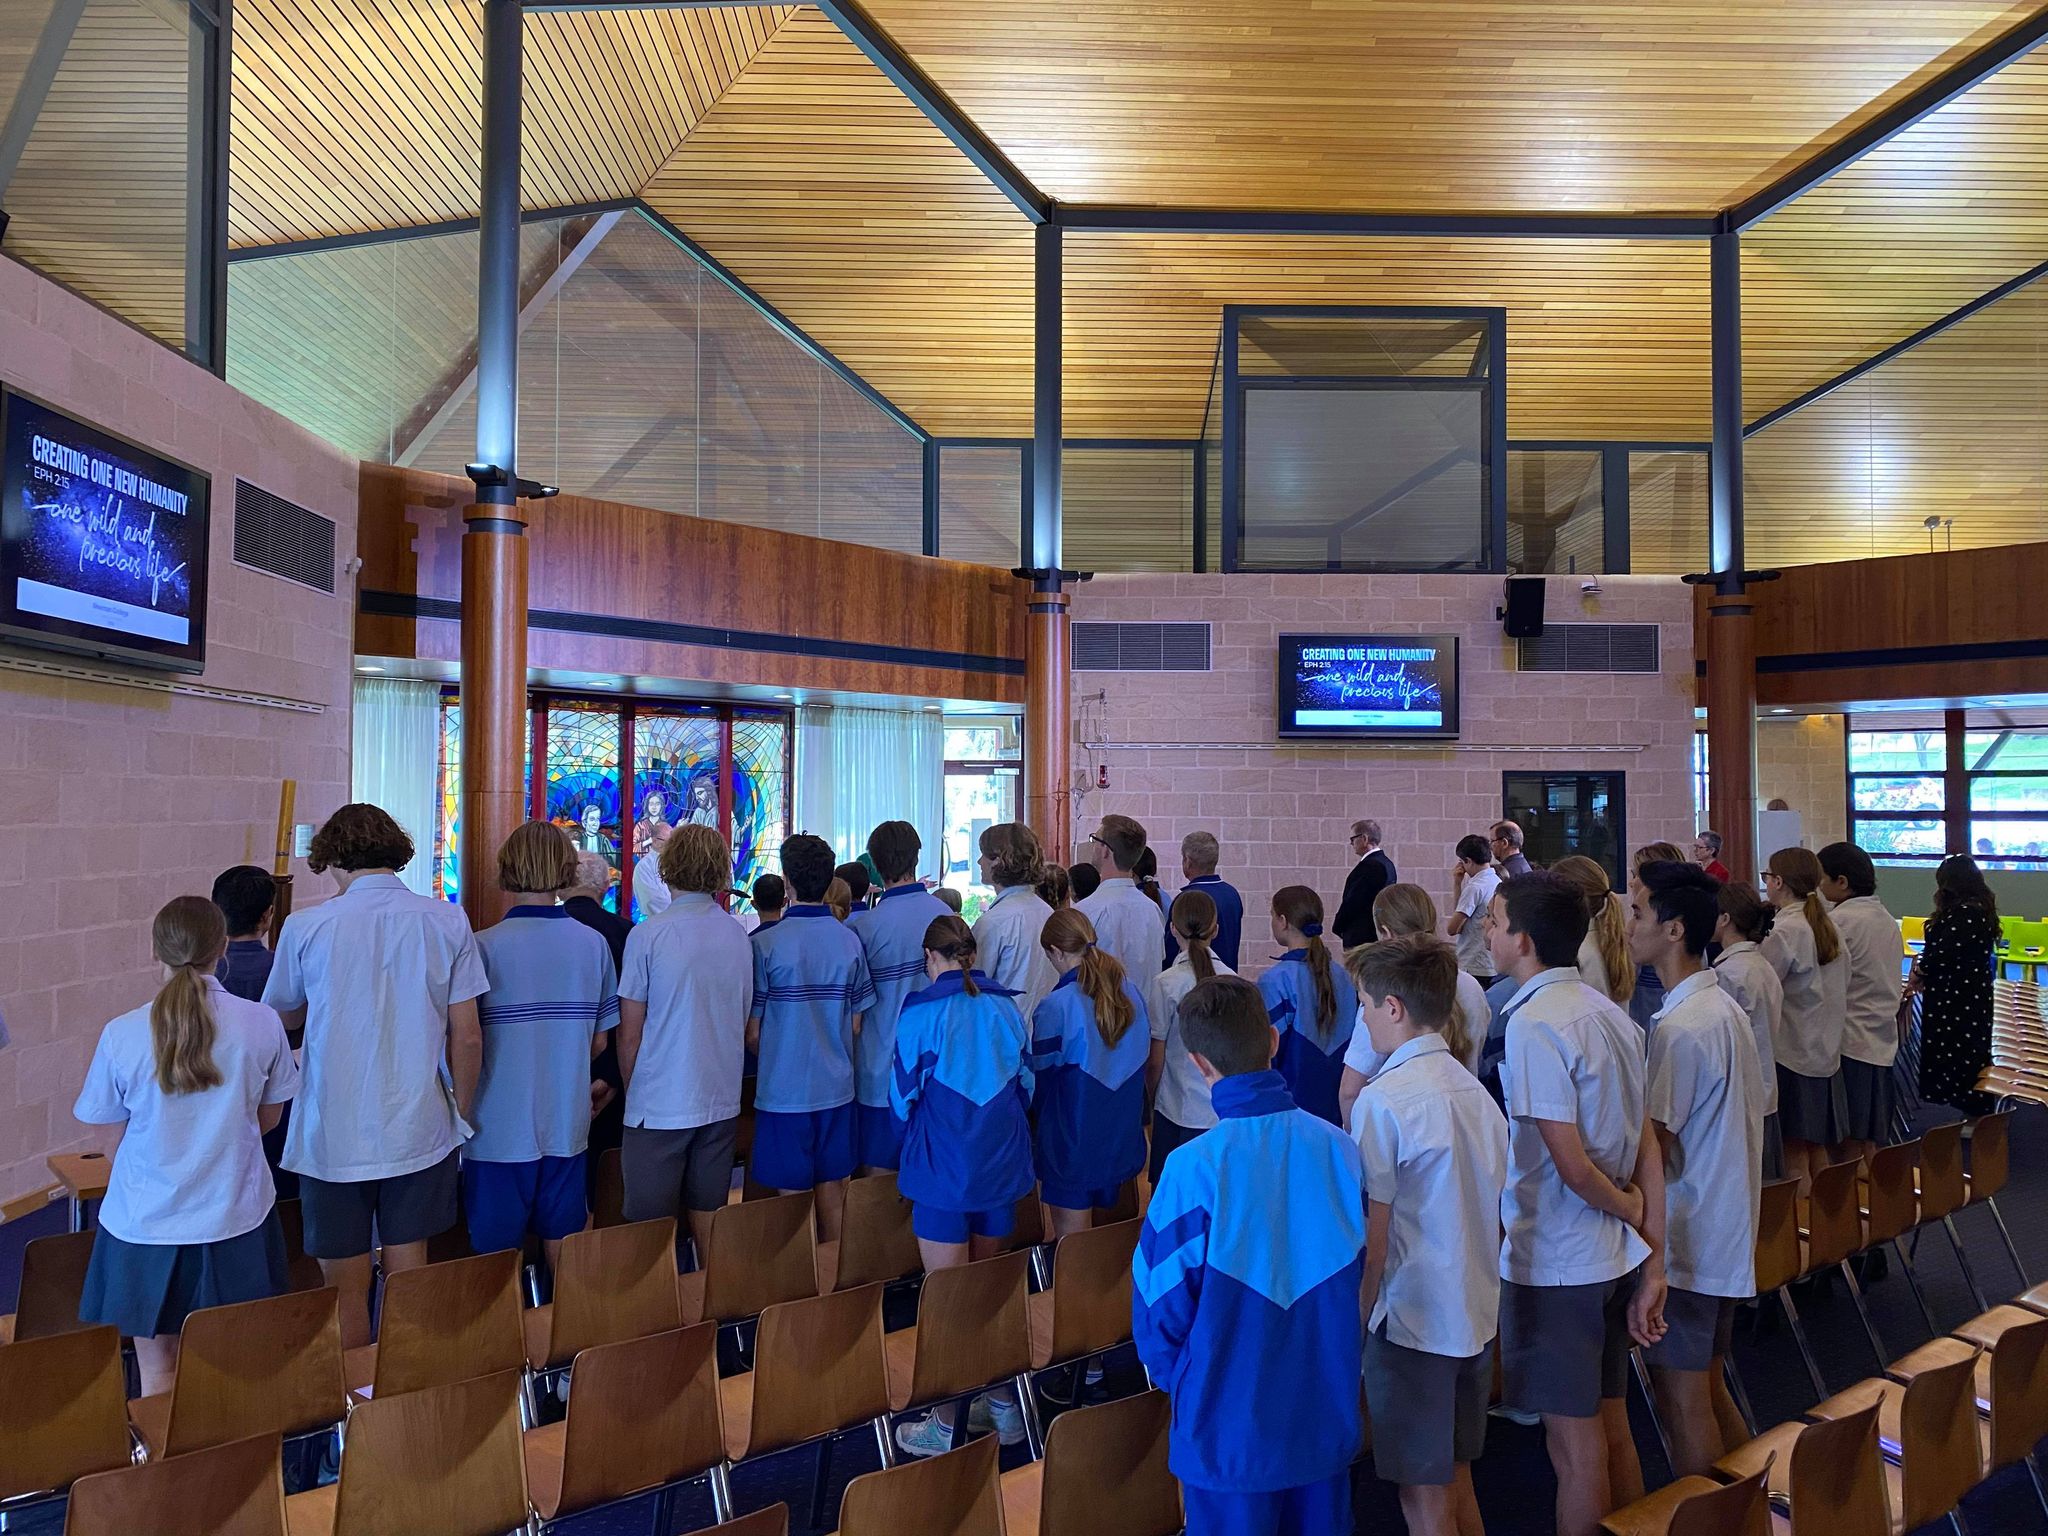 Newman News Term 4 Week 2: From the Leader of Mission and Catholic Identity